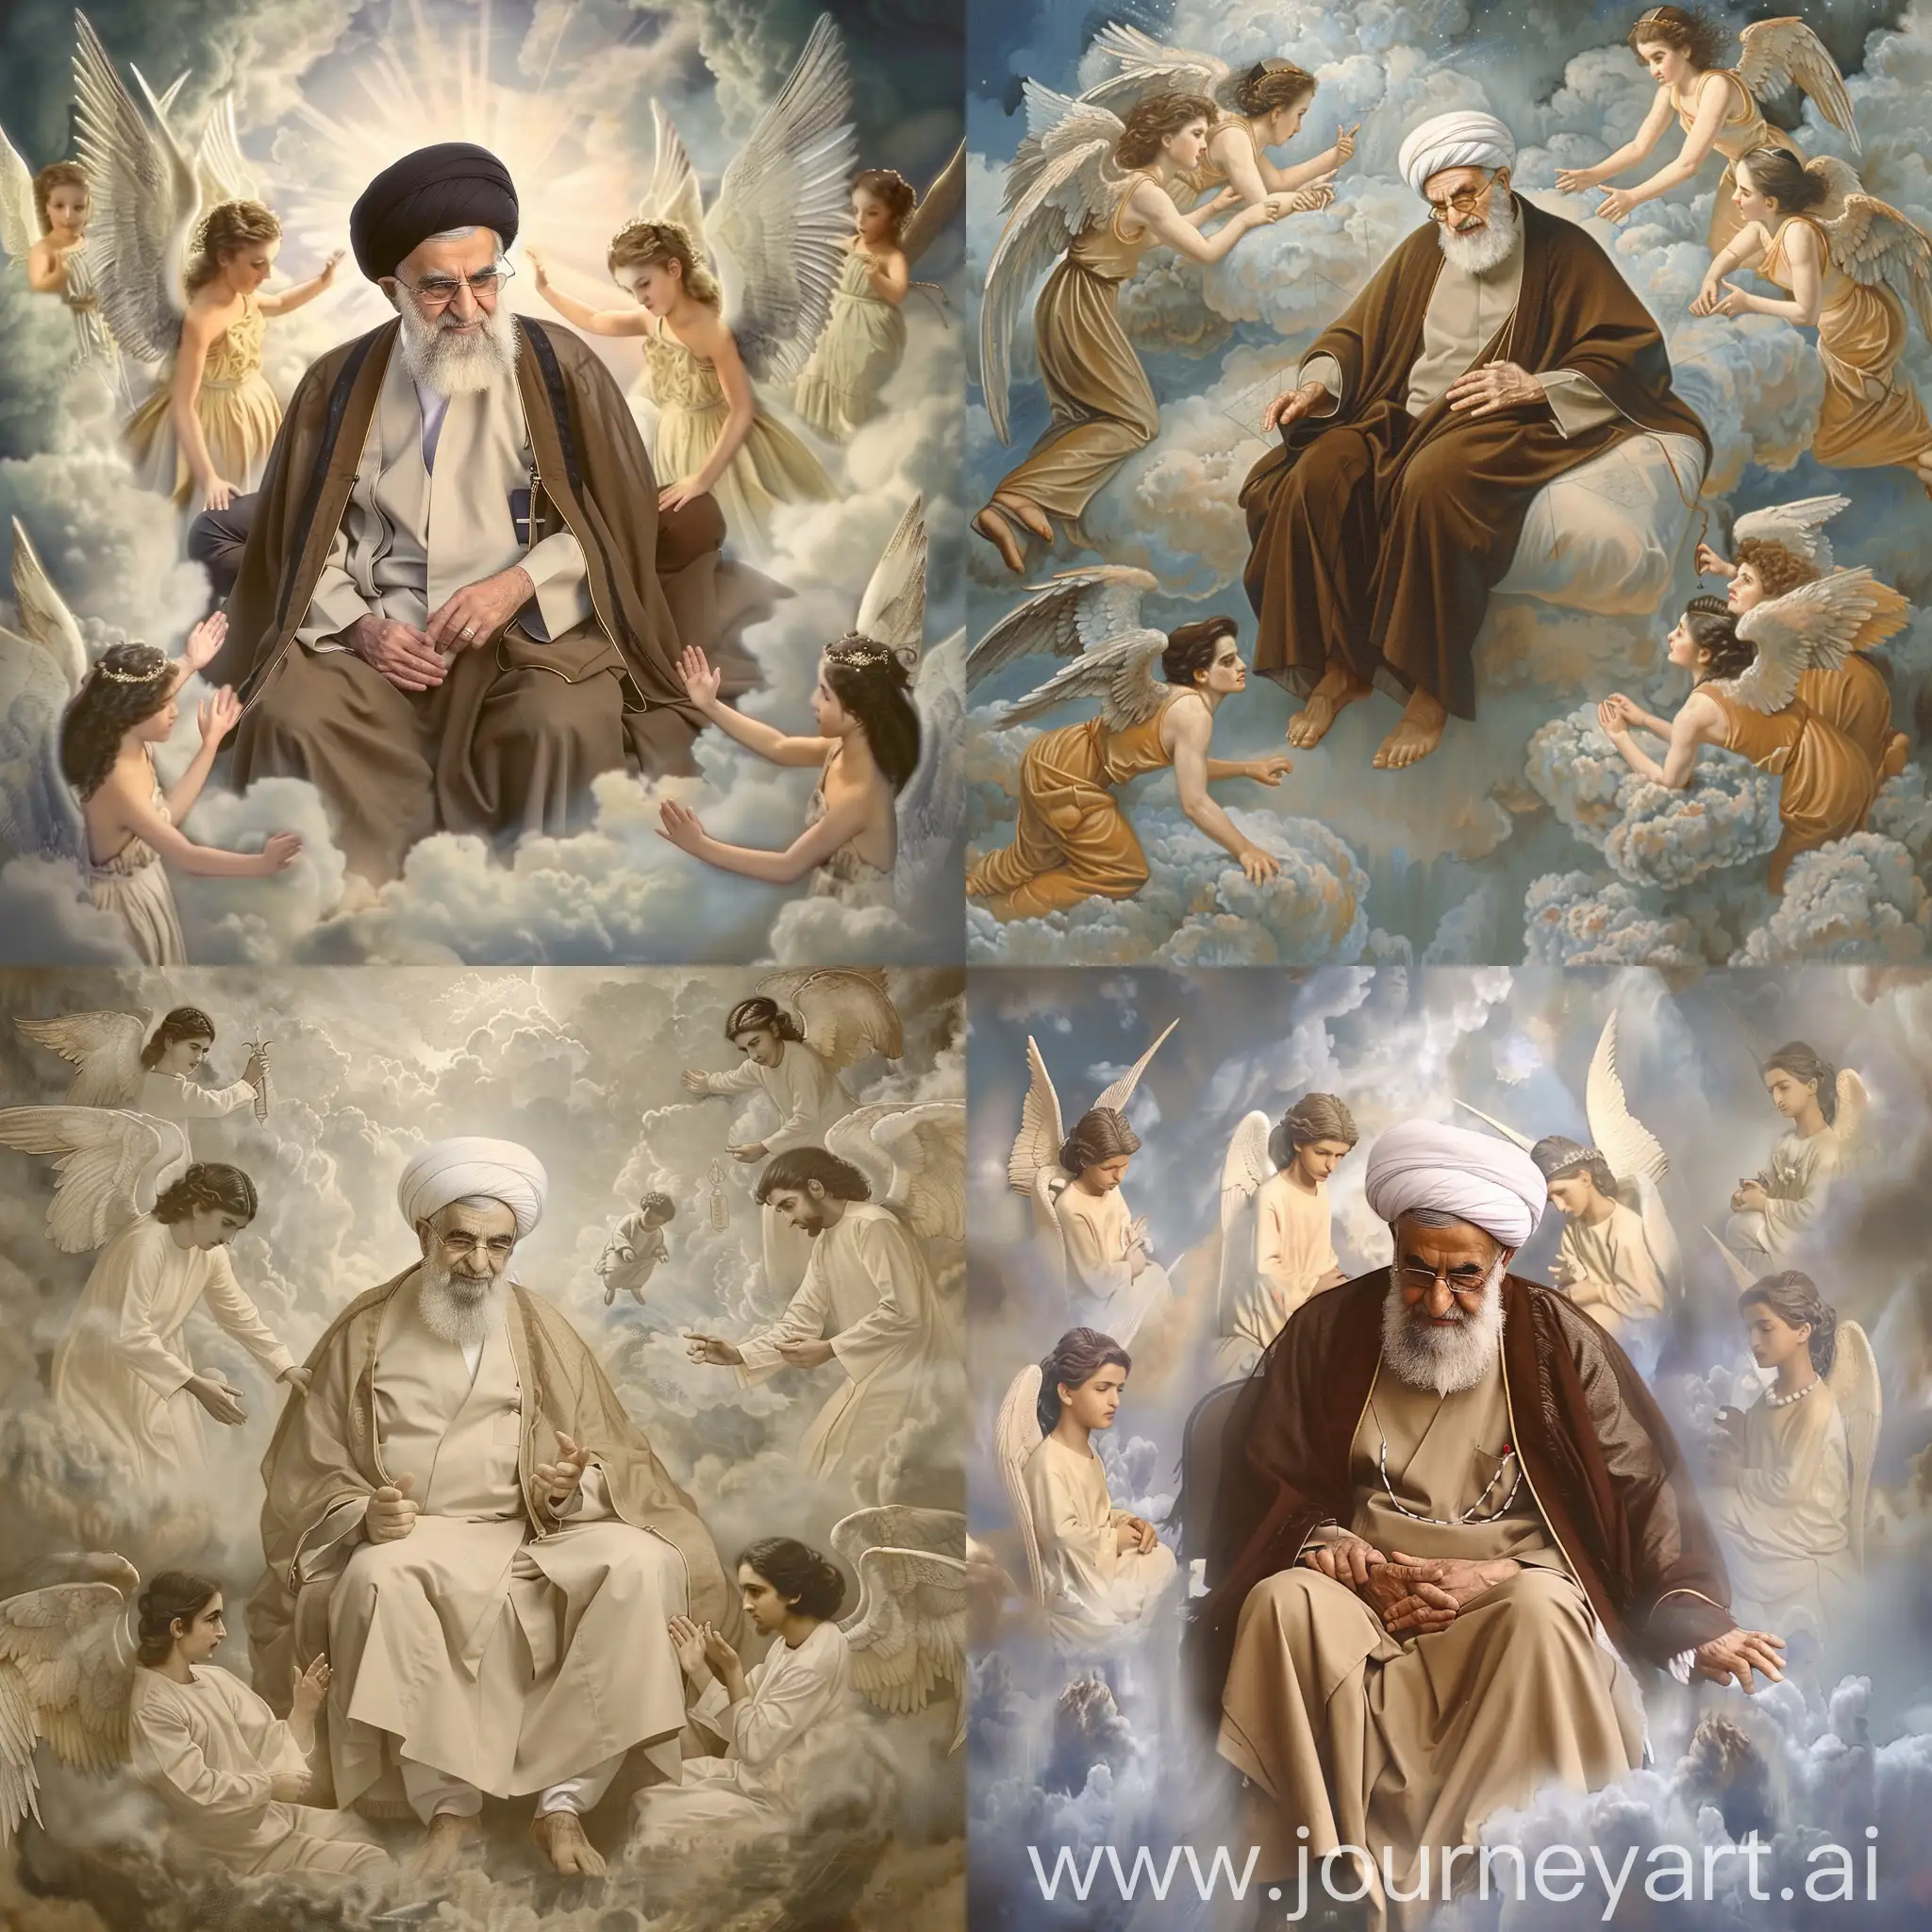 Real photo of Imam Khomeini in heaven with angels